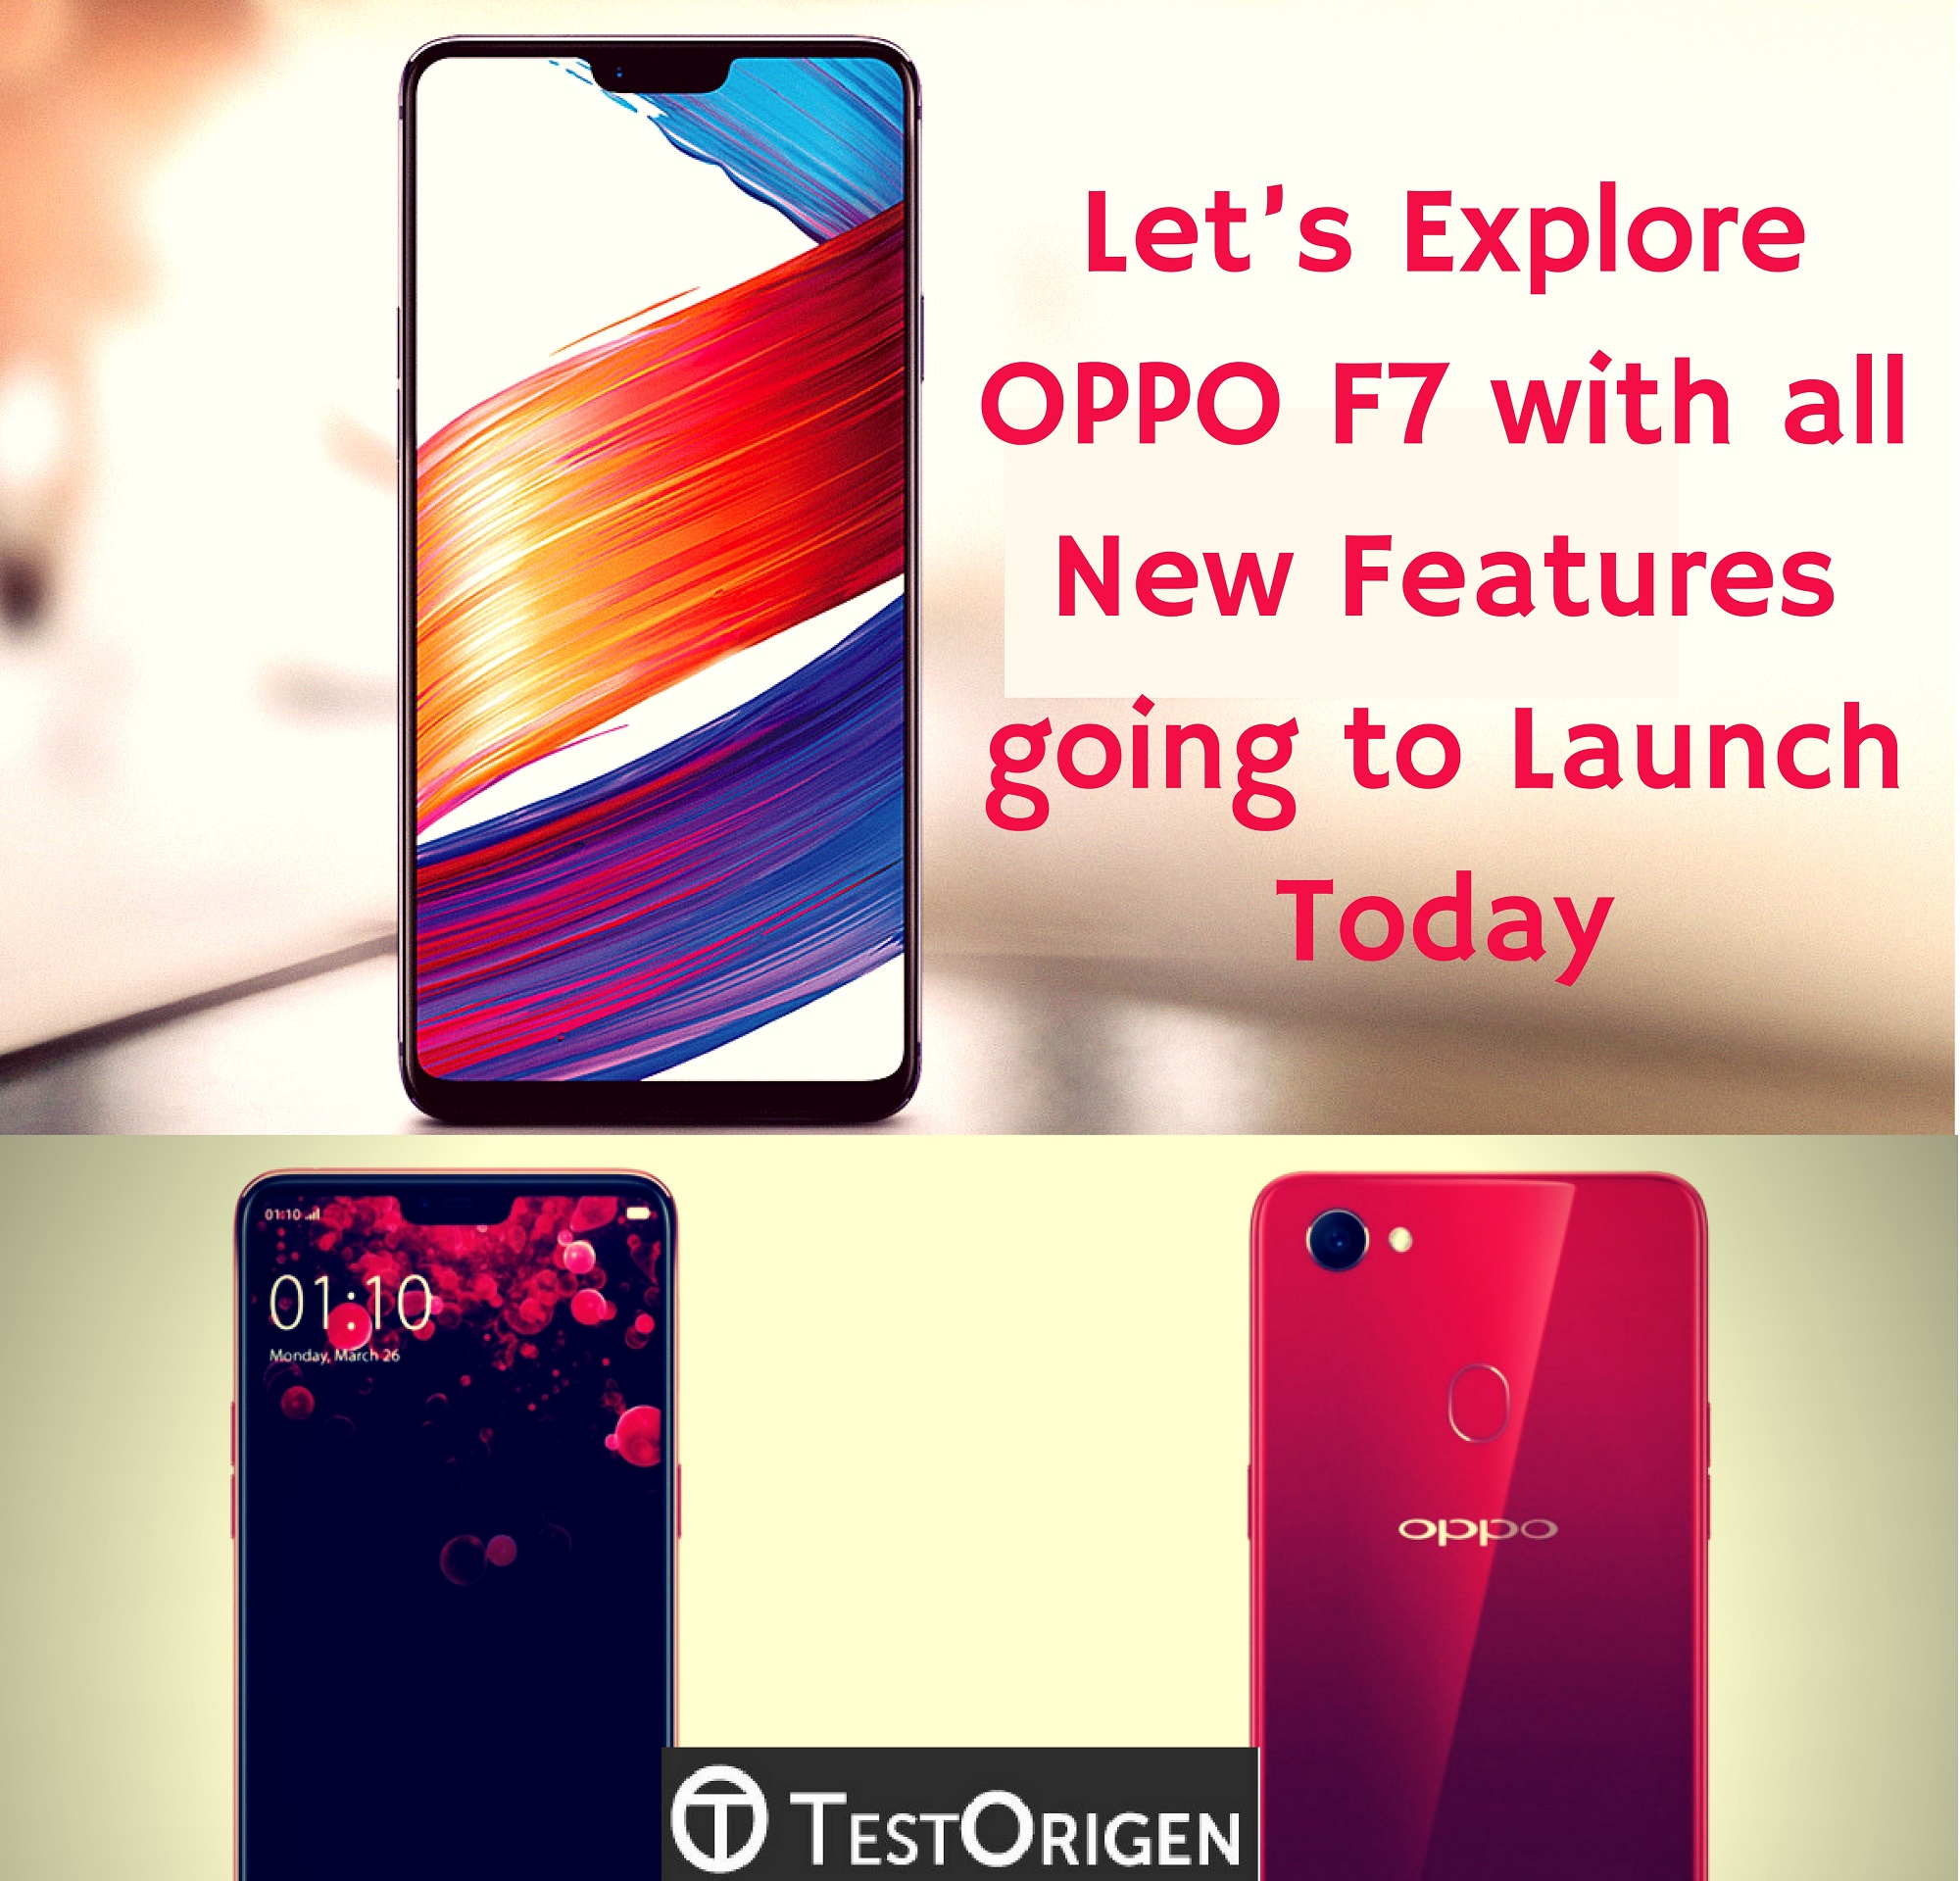 Let’s Explore OPPO F7 with all New Features going to Launch Today